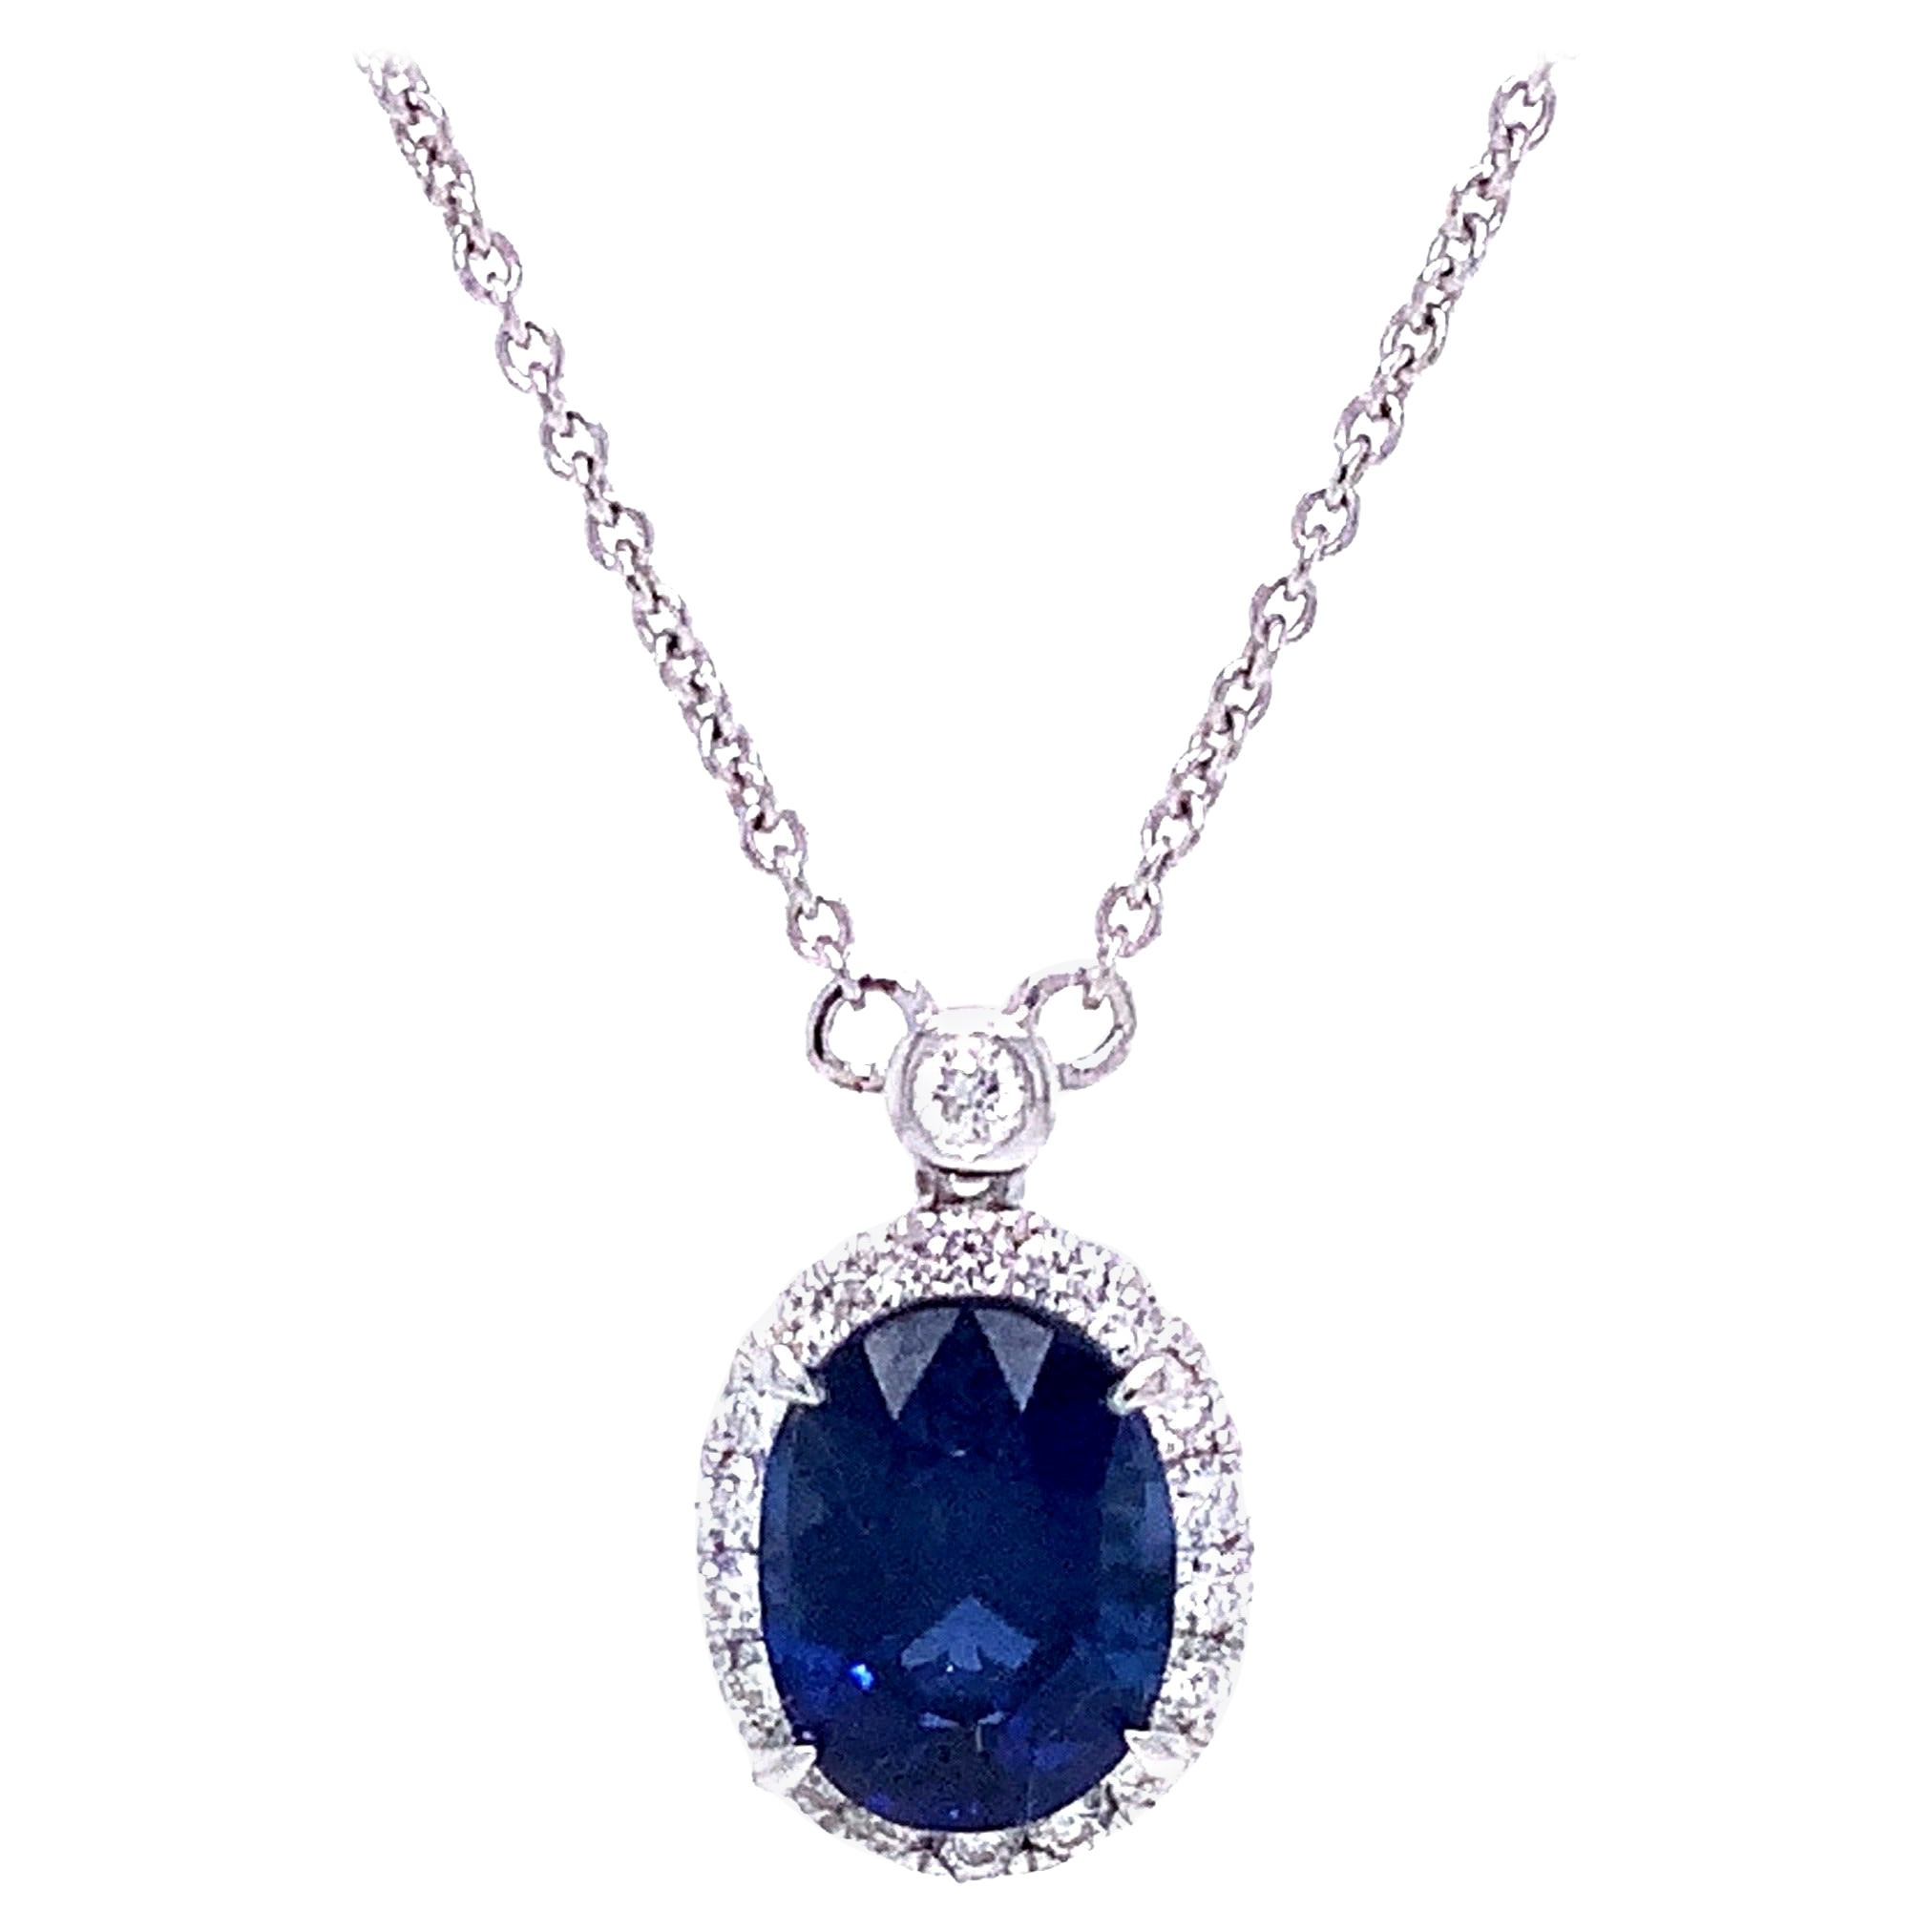 Roman + Jules GIA Certified Blue Sapphire and Diamond Necklace Set in 18k W/G